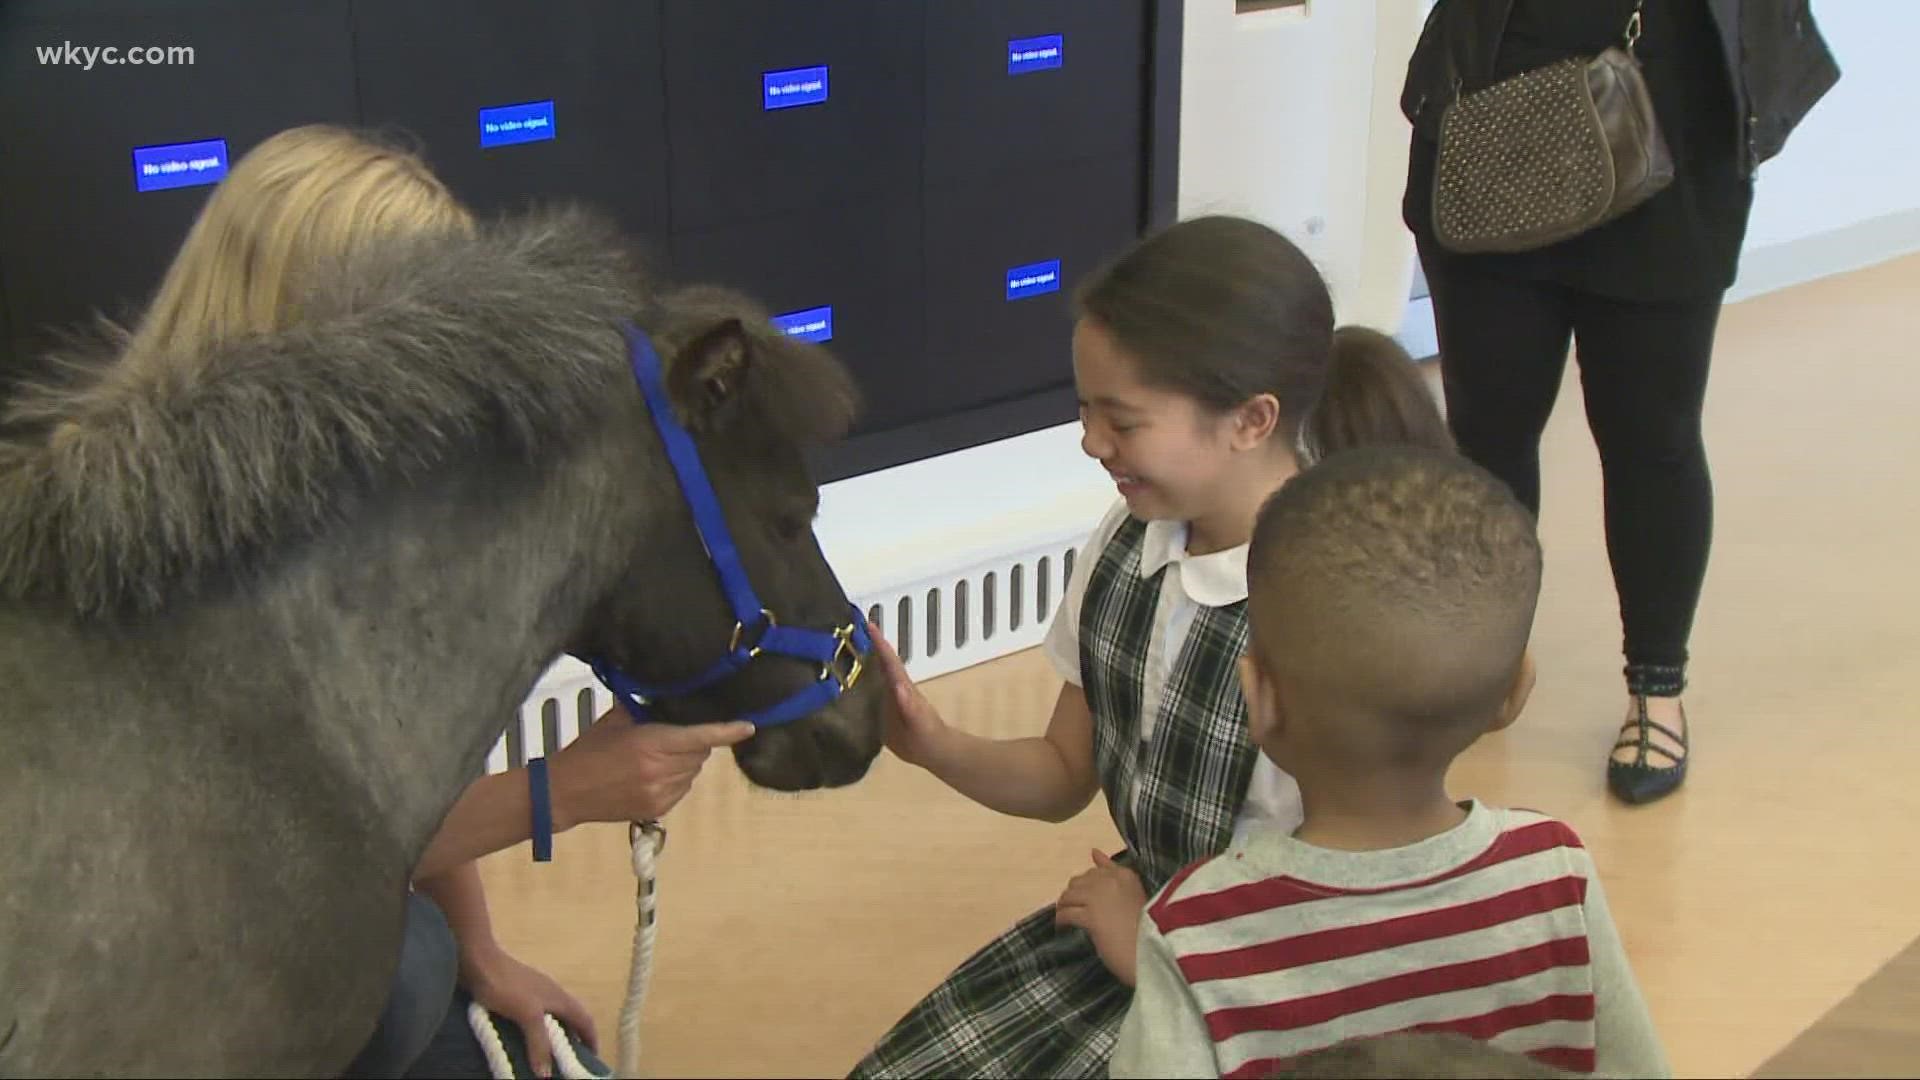 A therapy horse known as Willie Nelson that visits patients at Akron Children’s Hospital is featured on ‘The Kelly Clarkson Show.’